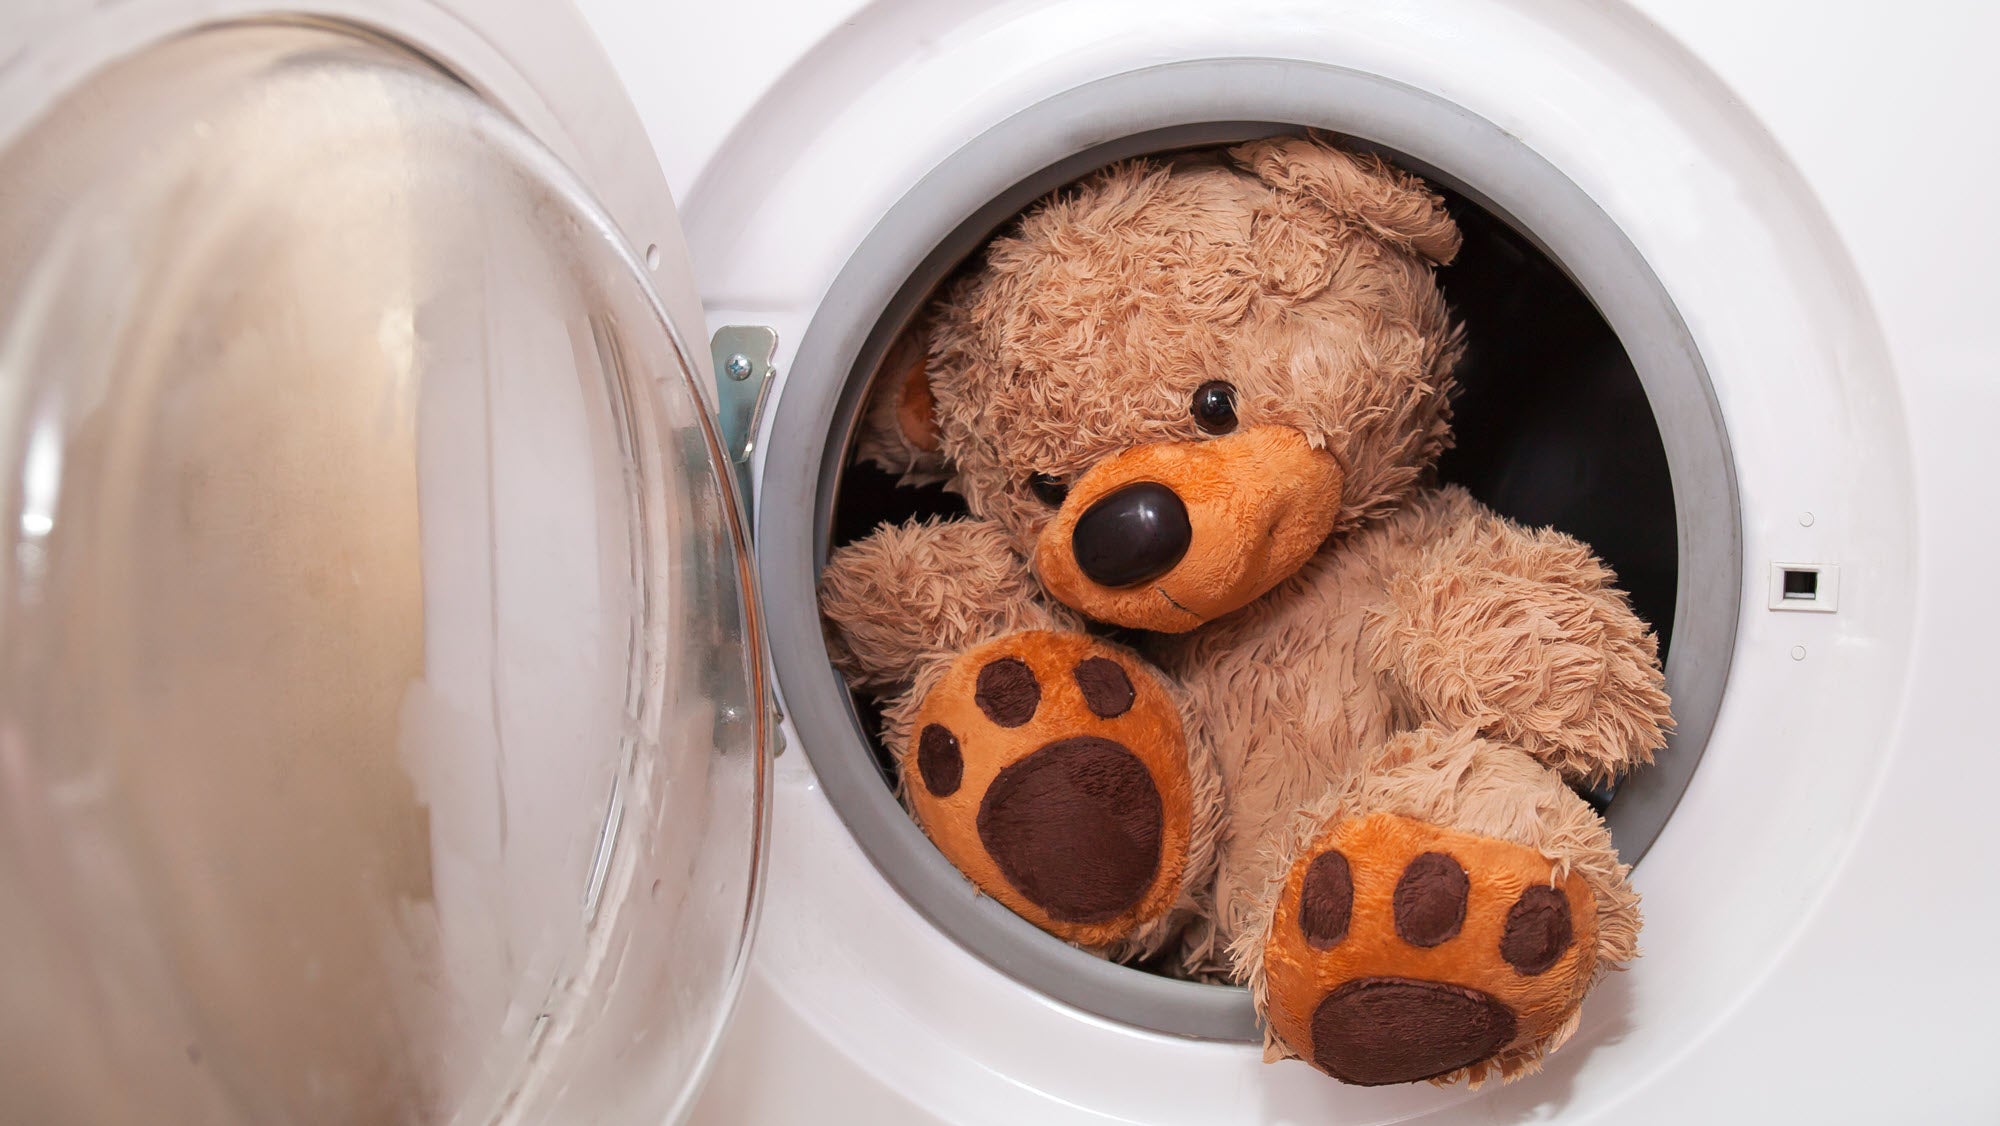 How to Clean Your Stuffed Animals